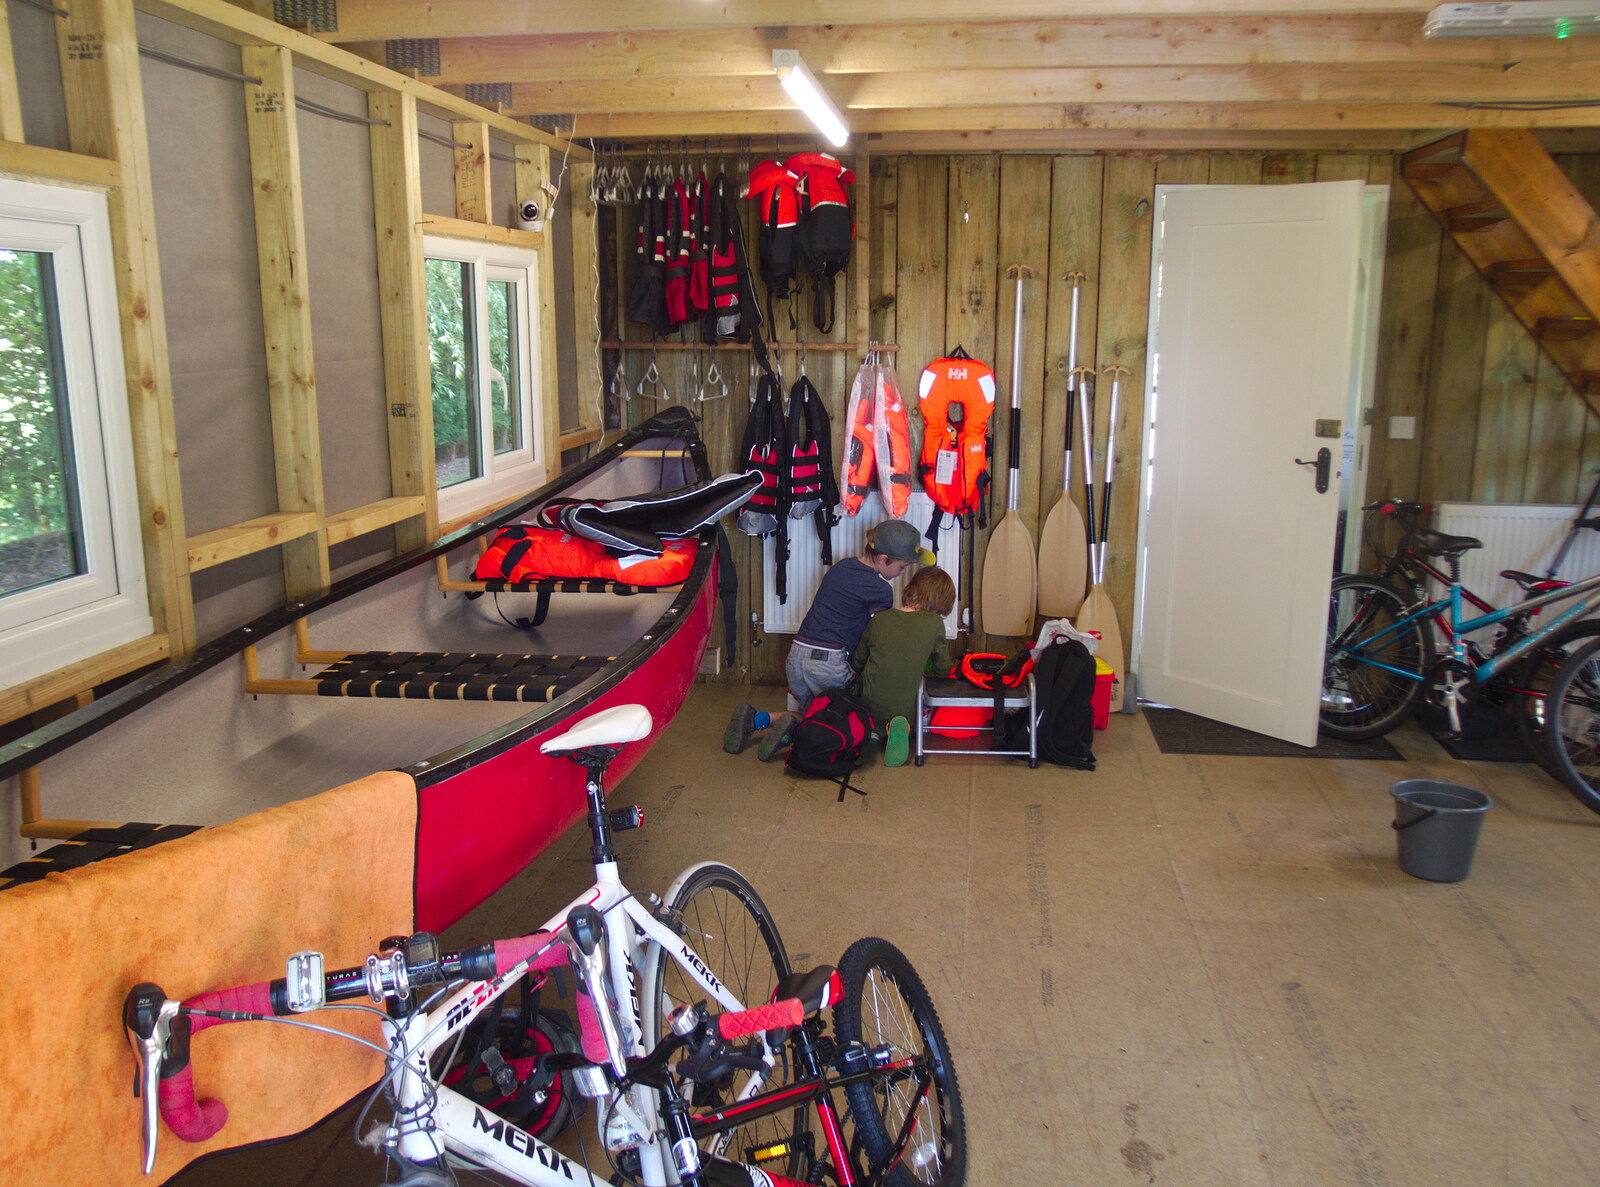 Harry and Benson look for stuff in the boathouse from Camping at Three Rivers, Geldeston, Norfolk - 1st June 2019